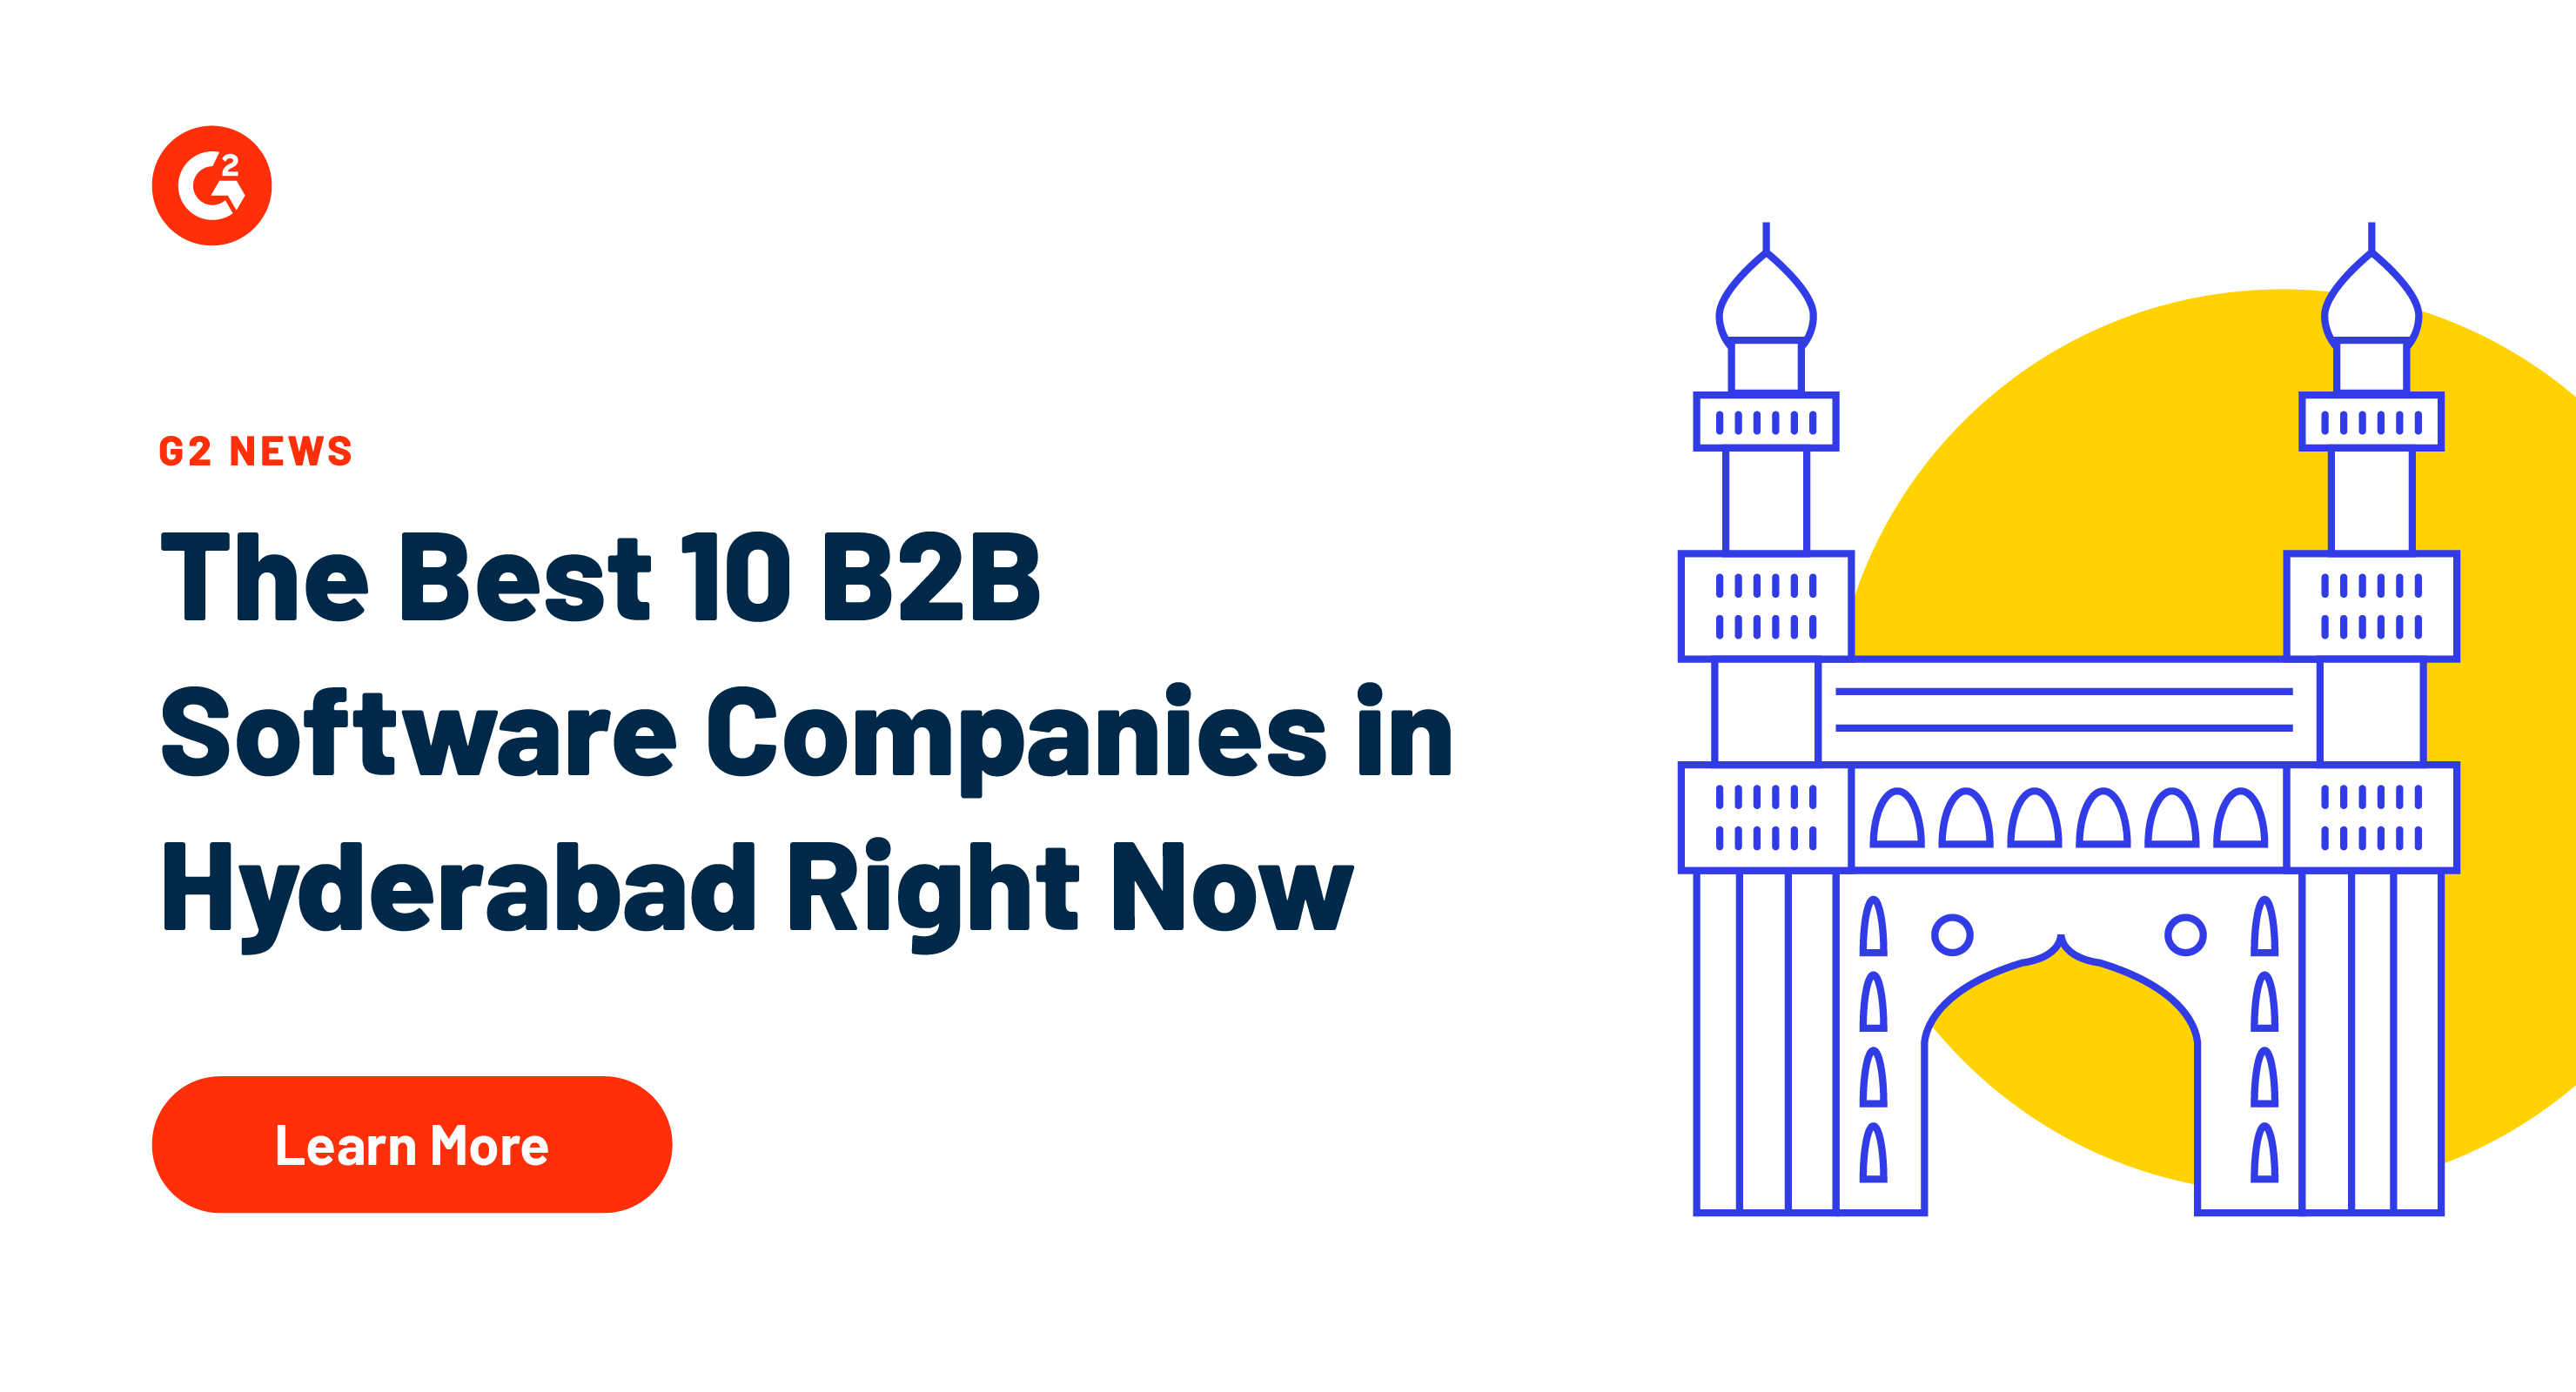 The Best 10 B2B Software Companies in Hyderabad Right Now